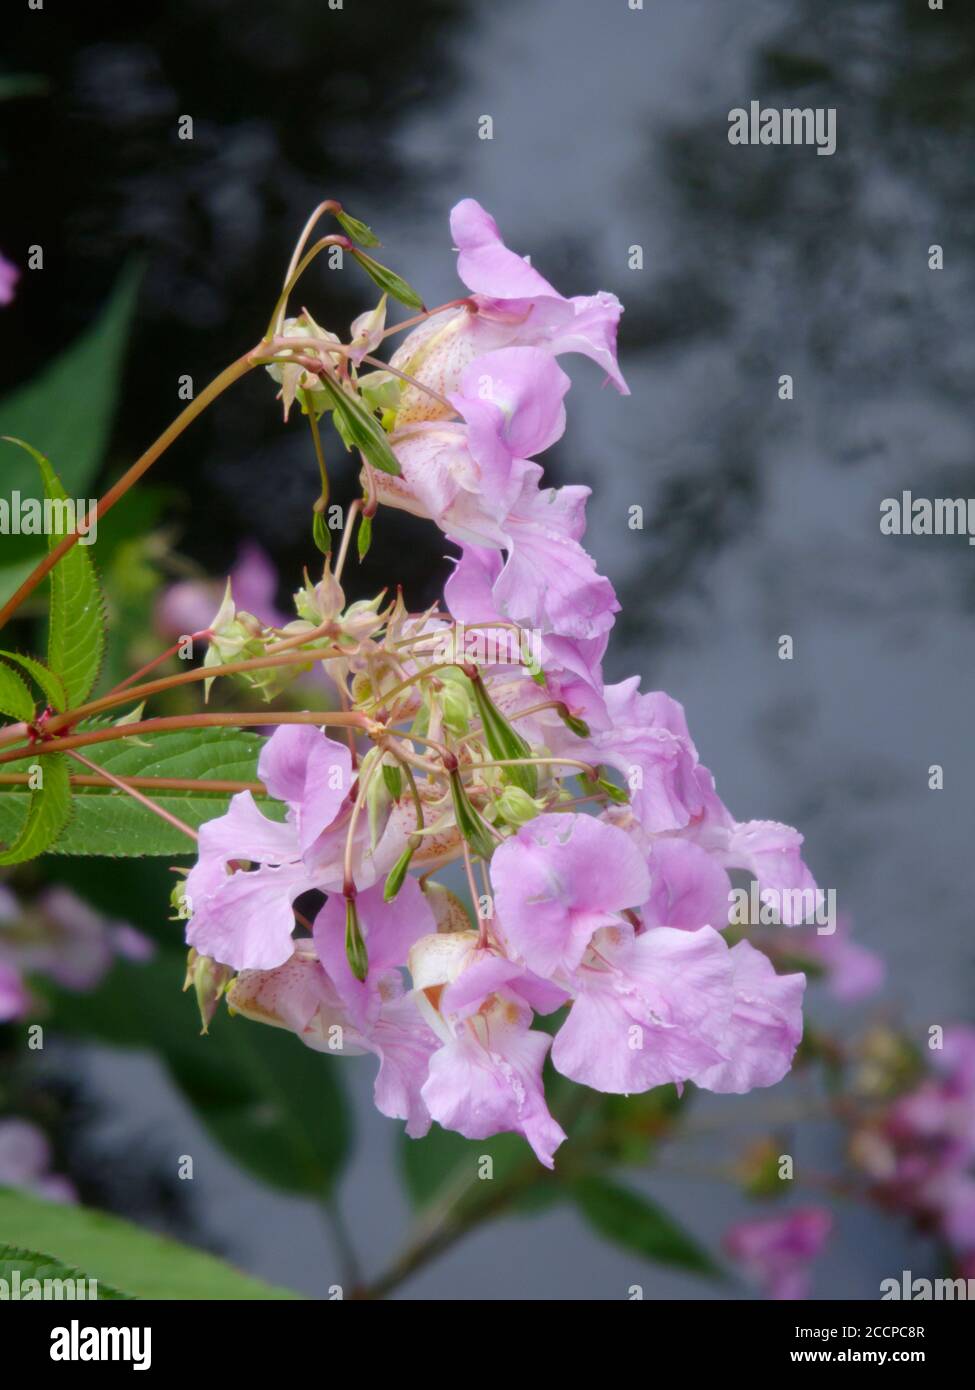 Himalayan Balsam ( Impatiens gladulifera ) A Highly Invasive Alien Species Weed In The UK Stock Photo